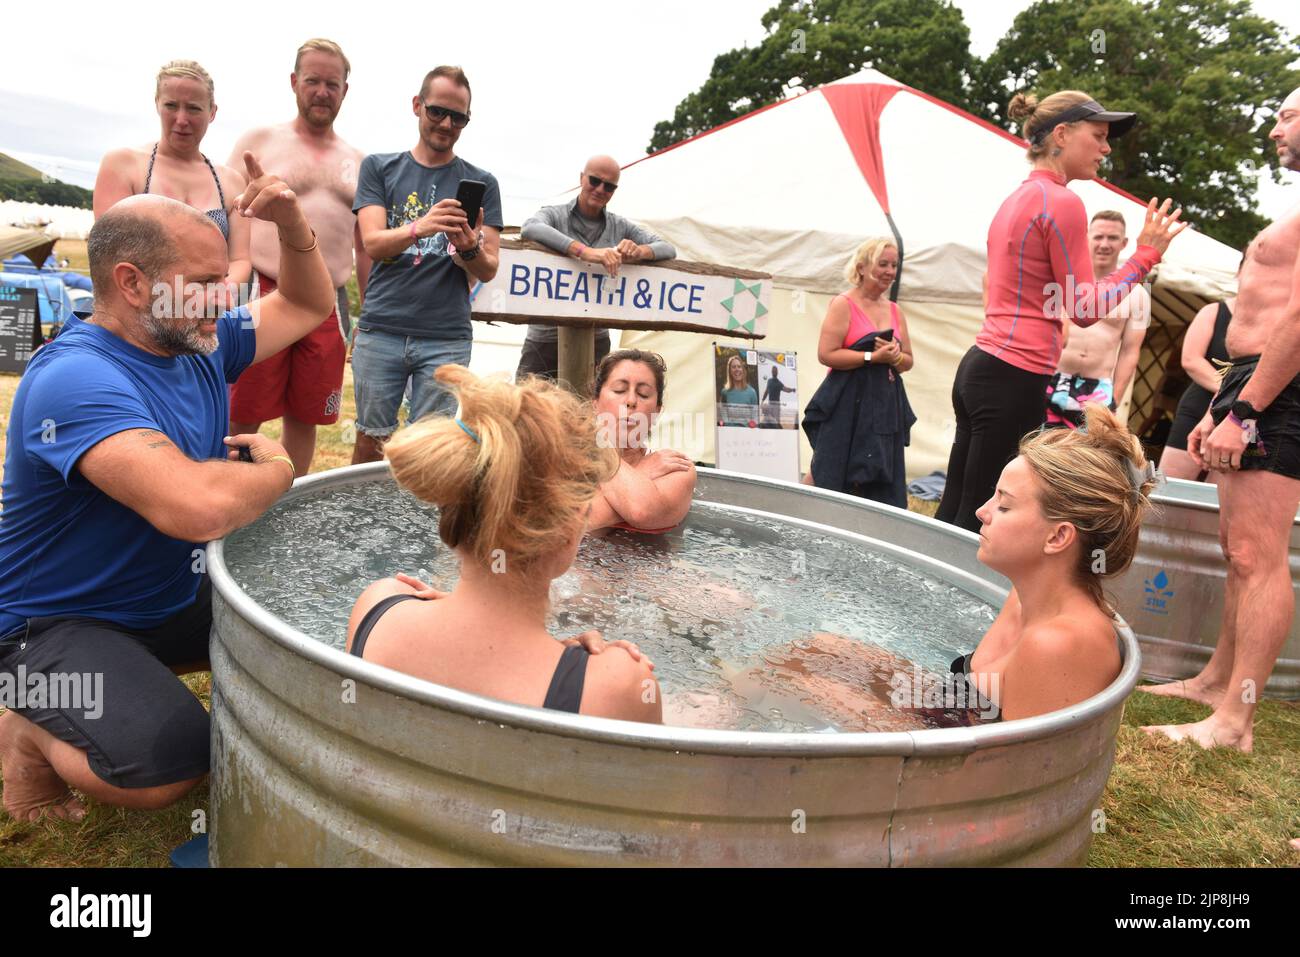 Well being, performance coach and official Wim Hof Method Instructor Will van Zyl takes an ice bath session @ family festival Camp Bestival @ Lulworth Castle and Estate, Dorset July 28 - 31 2022 Stock Photo